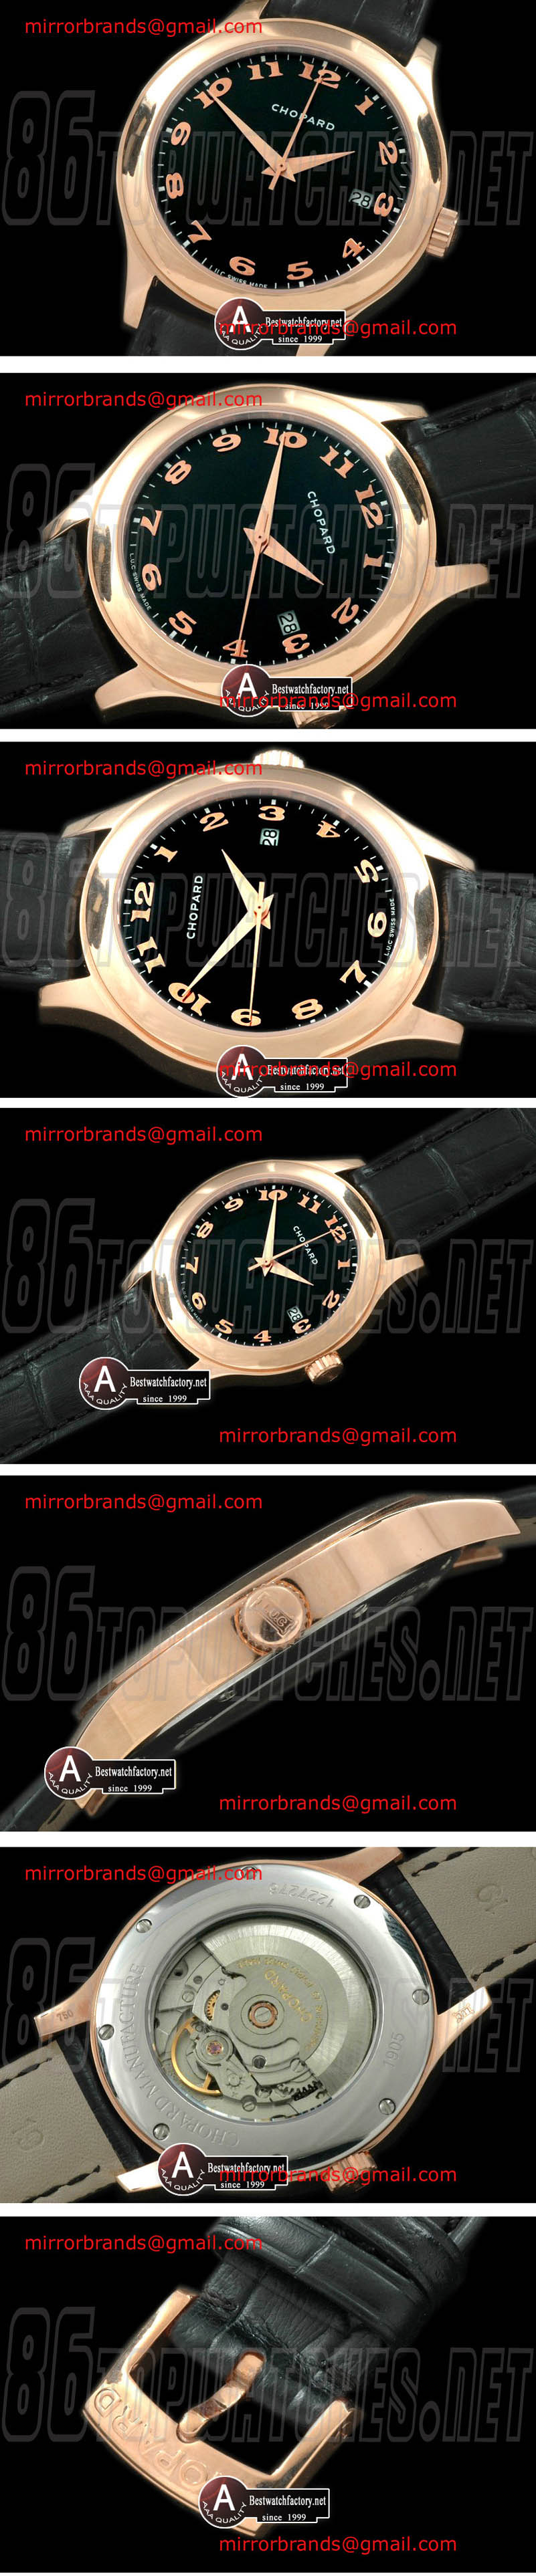 Luxury Chopard LUC Automatic Rose Gold/Leather Black Asia 2824